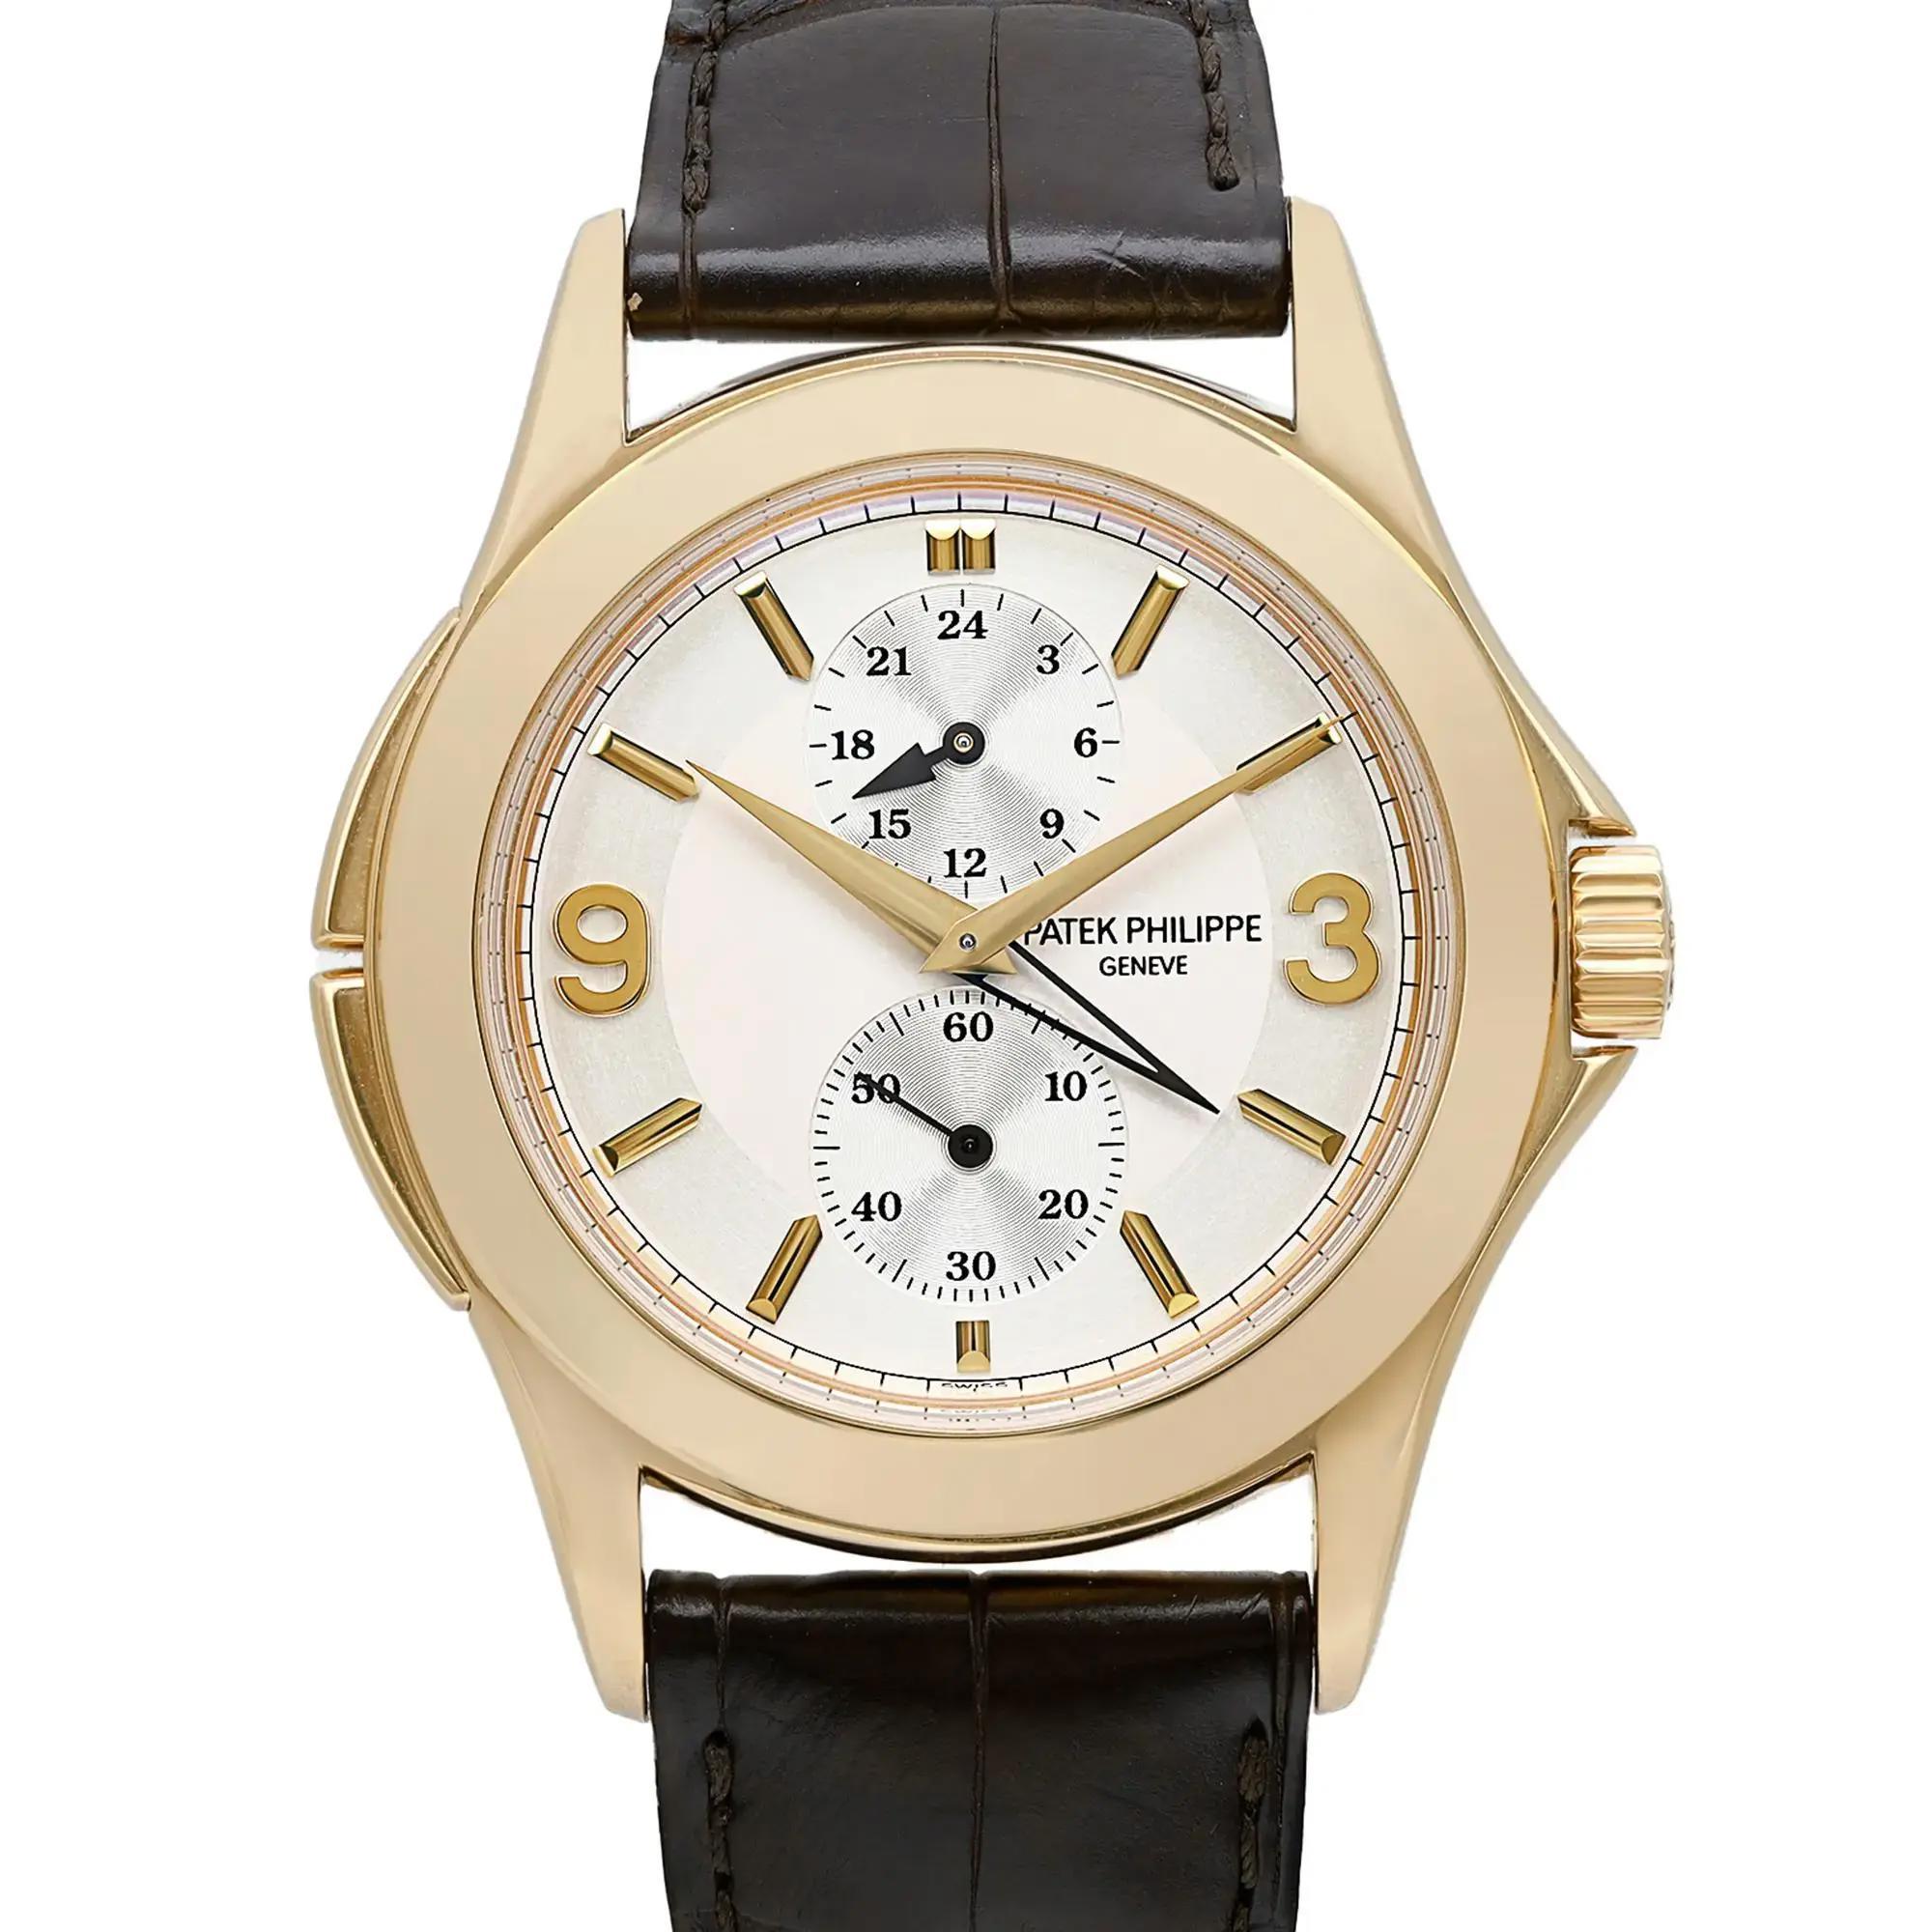 Pre-owned. Good condition. Visible signs of wear on the band.

Brand: Patek Philippe
Model Number: 5134J
Department: Men
Country/Region of Manufacture: Switzerland
Style: Luxury
Model Name: Patek Philippe Travel Time
Vintage: No

Movement:
Type: